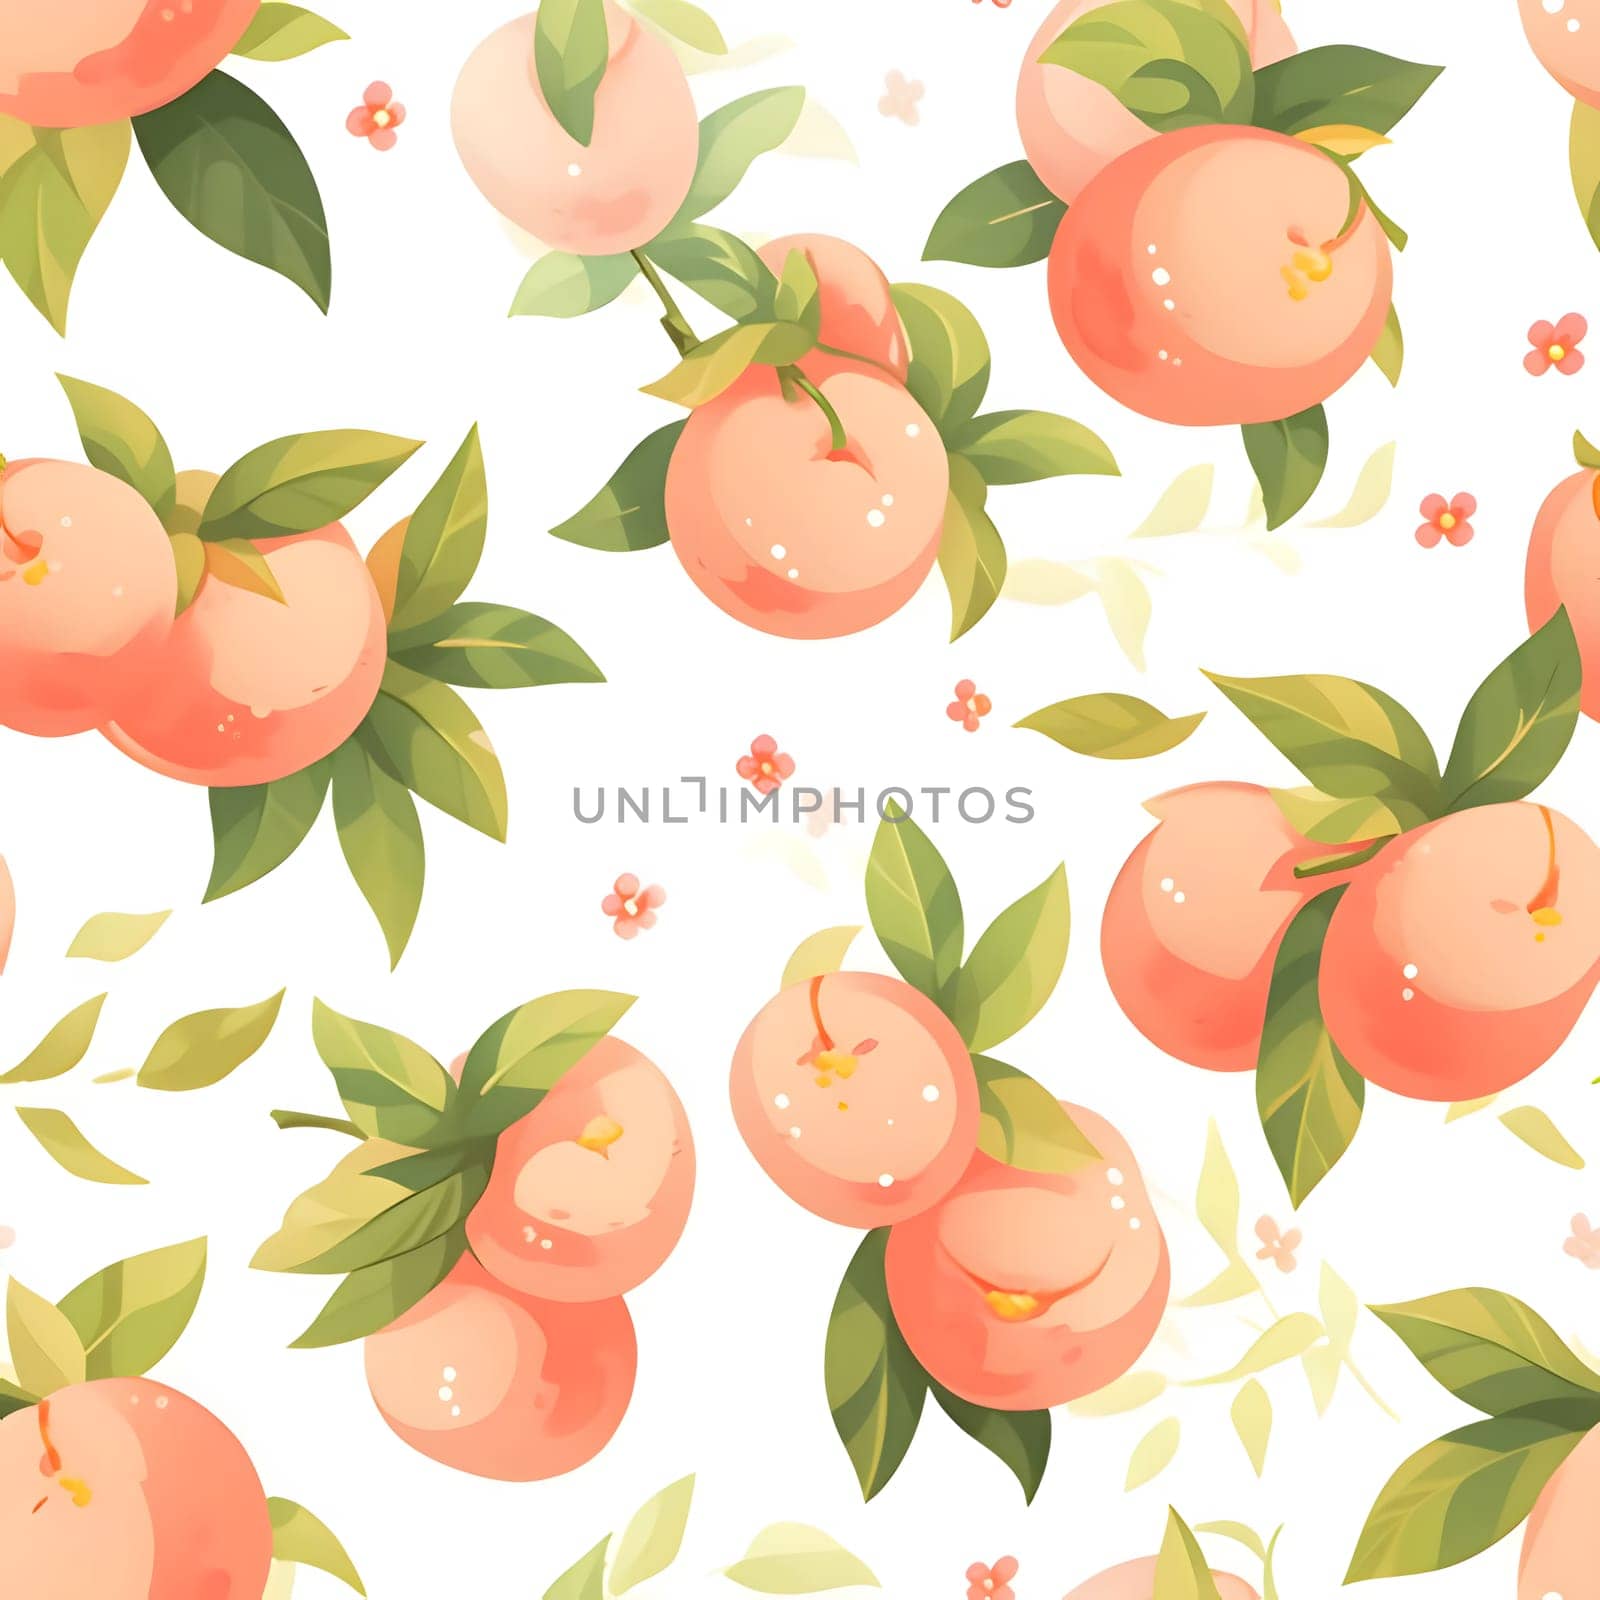 Patterns and banners backgrounds: Seamless pattern with peaches and leaves. Vector illustration.